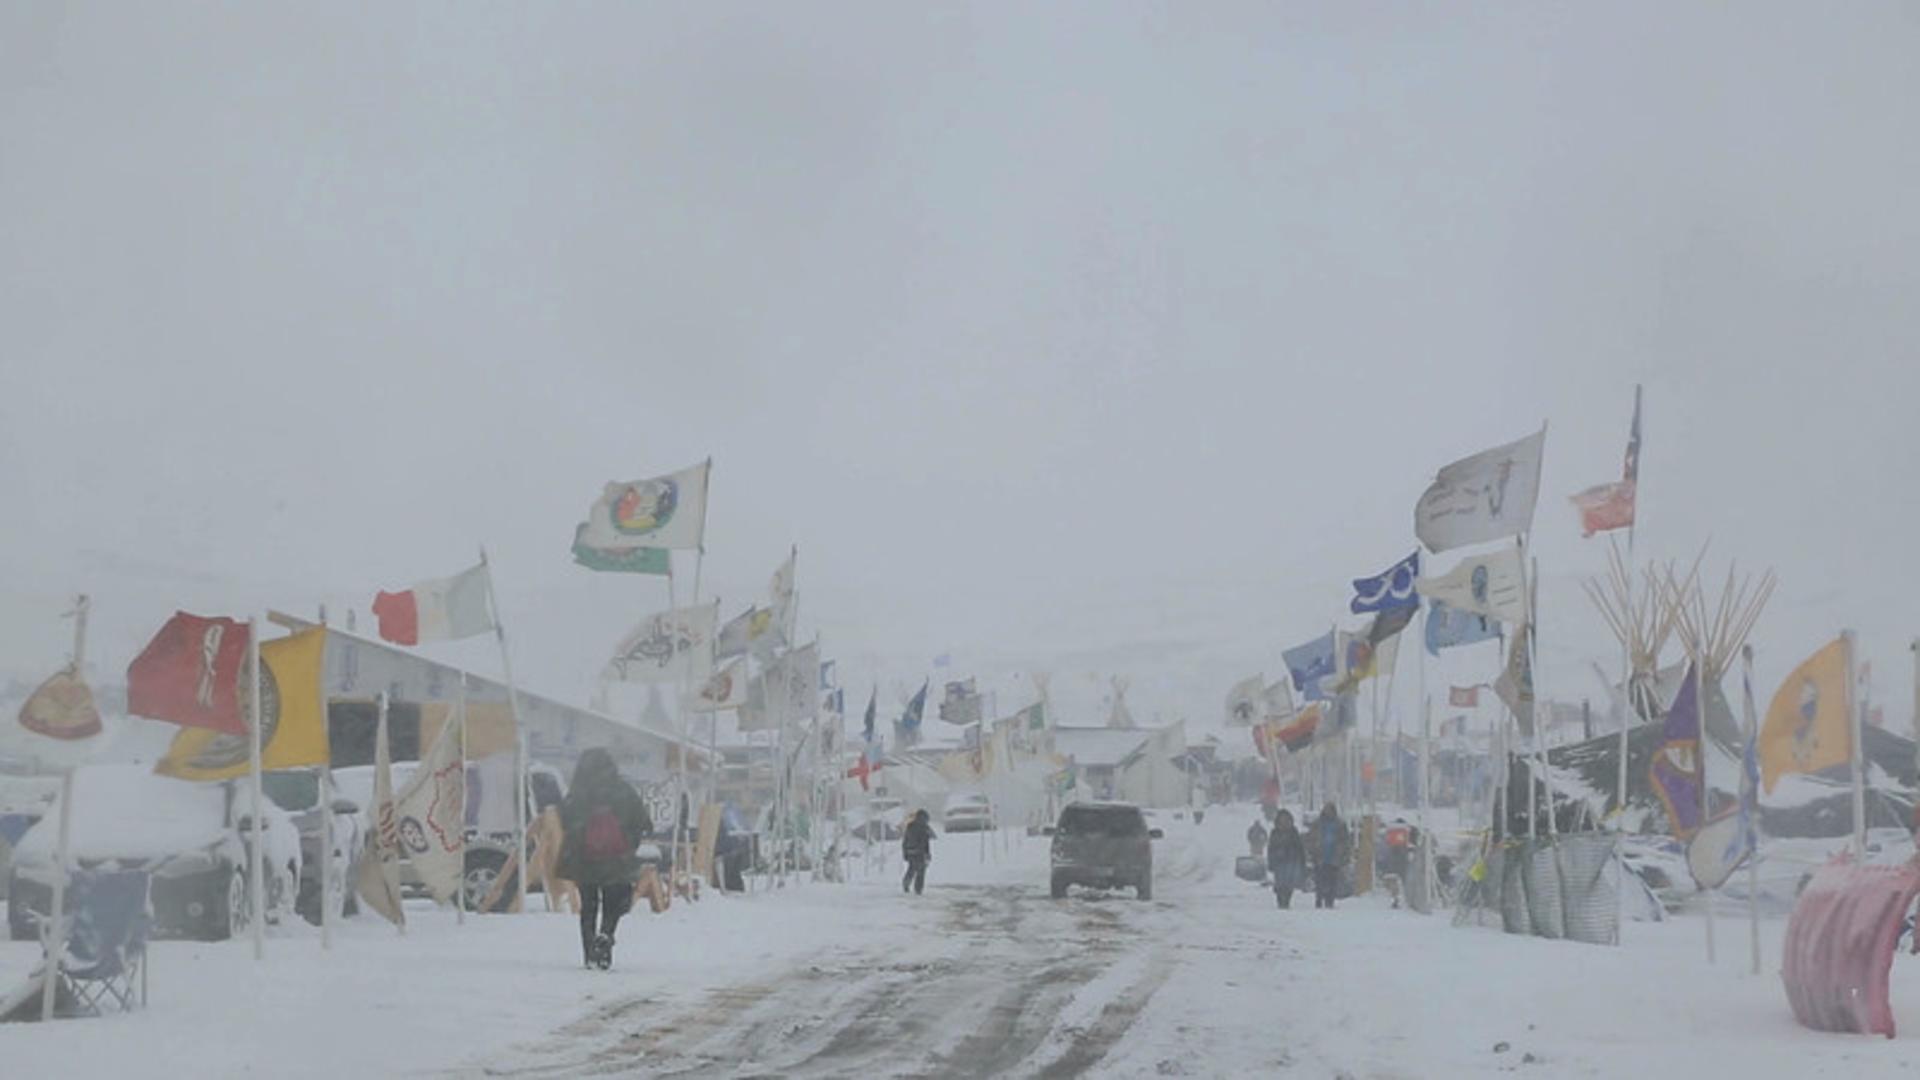 A still from the film Spaces of Exception, showing Standing Rock covered in snow under a gray sky. There is a road with a car in the middle of the frame, and a few people in big coats. Over 50 flags of Indigenous nations and other countries are on either side of the road.